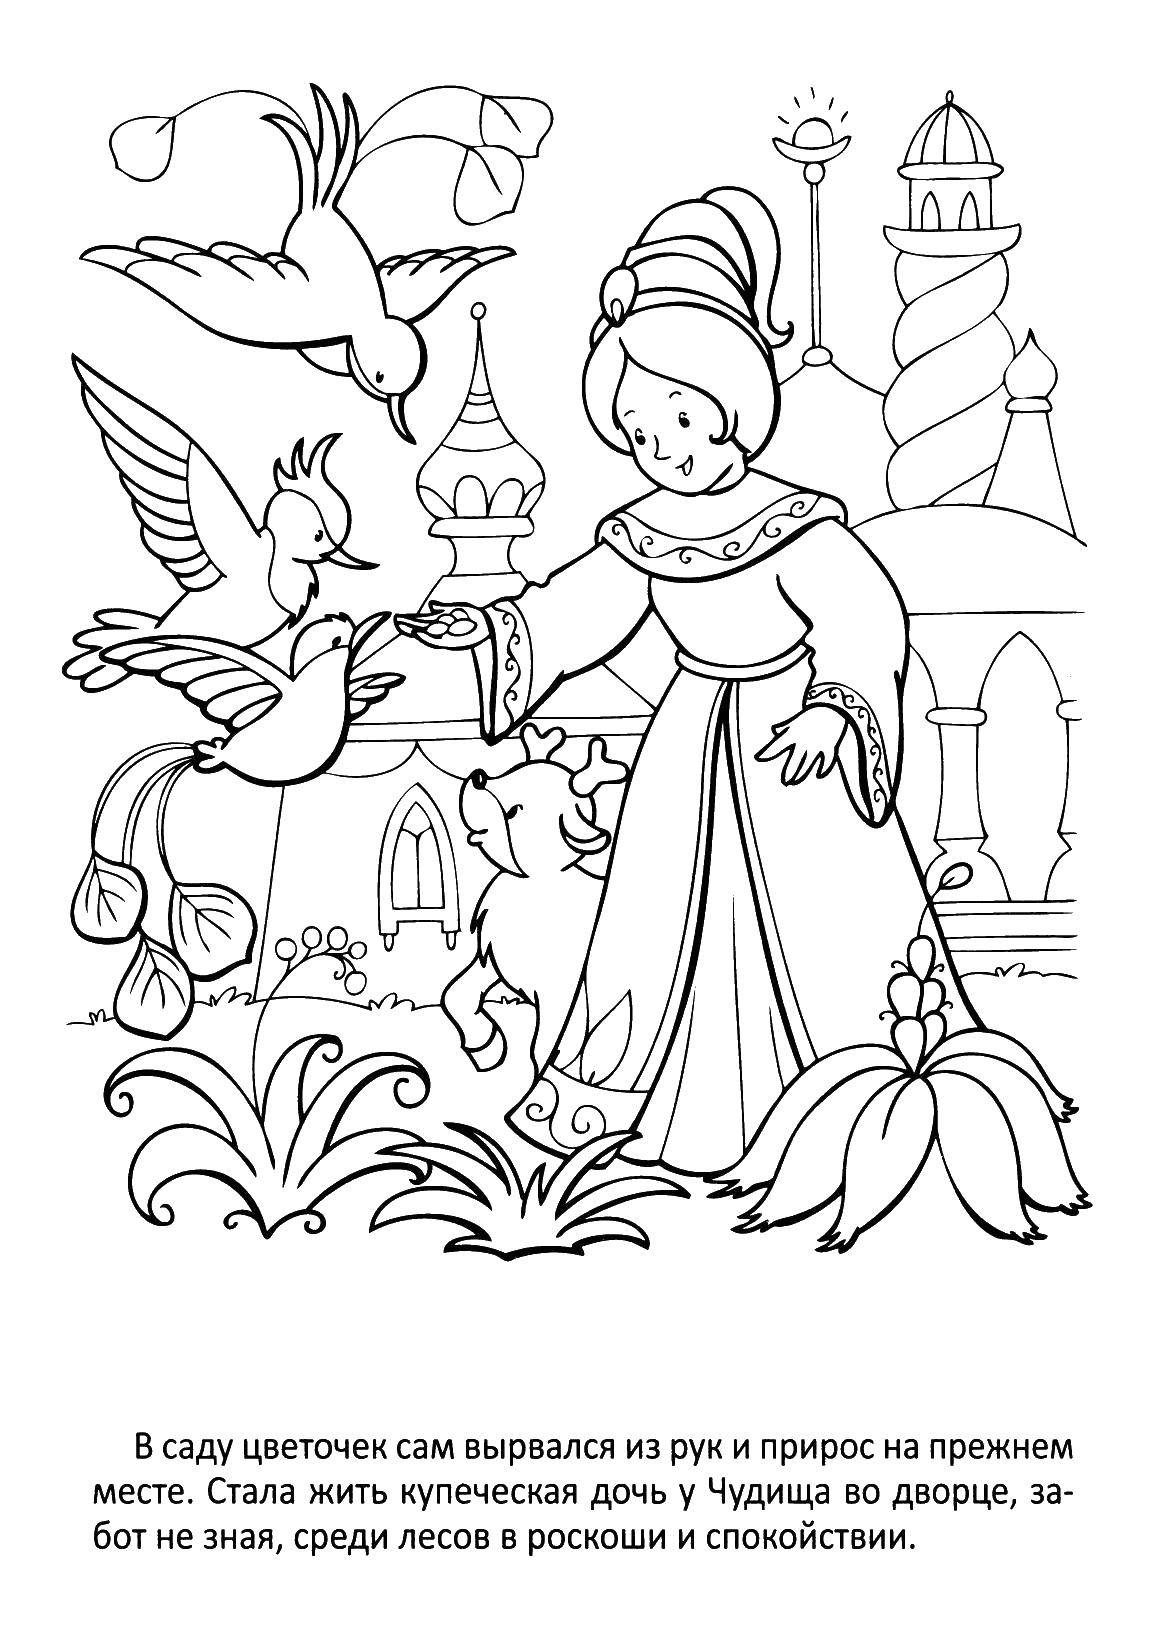 Coloring The scarlet flower. Category the scarlet flower. Tags:  Scarlet flower, fairy tale.